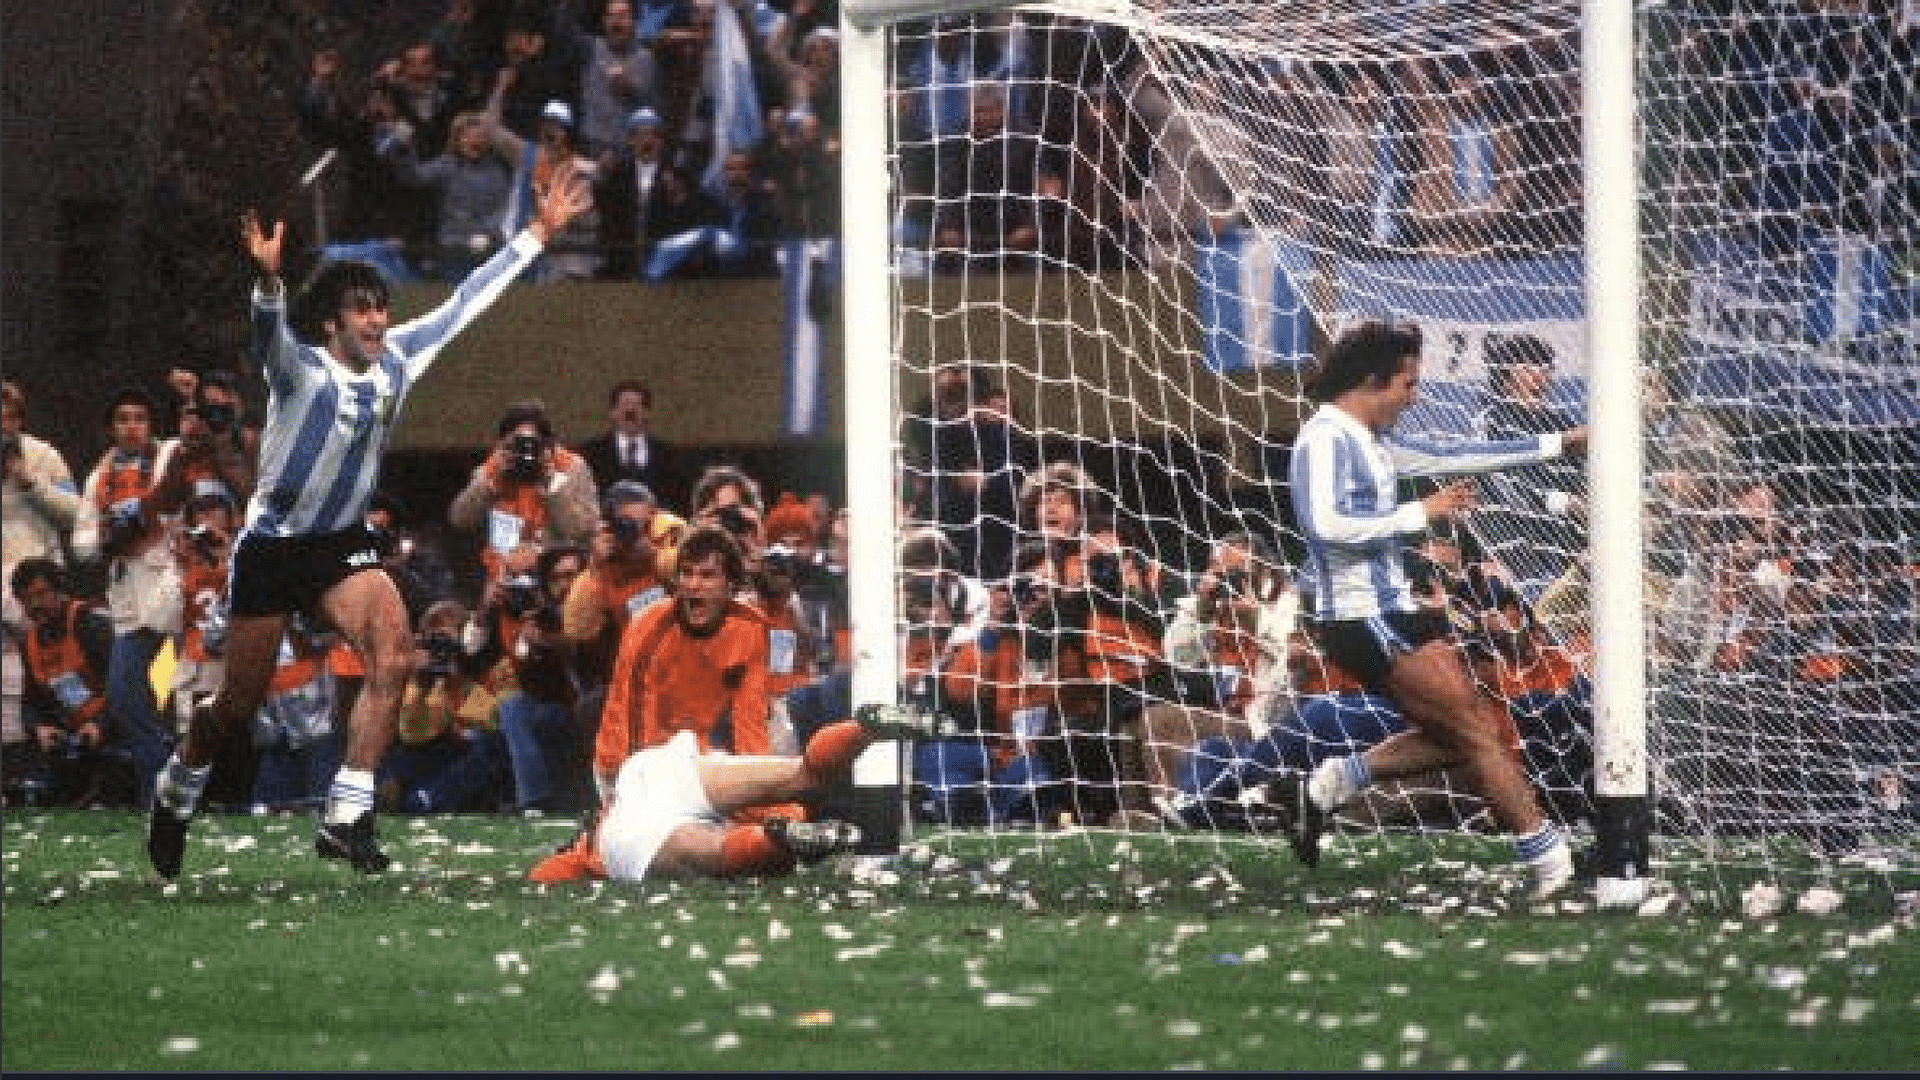 Mario Kempes (left) celebrates his second goal to secure the World Cup win amidst a ticker tape adulation by the crowd.